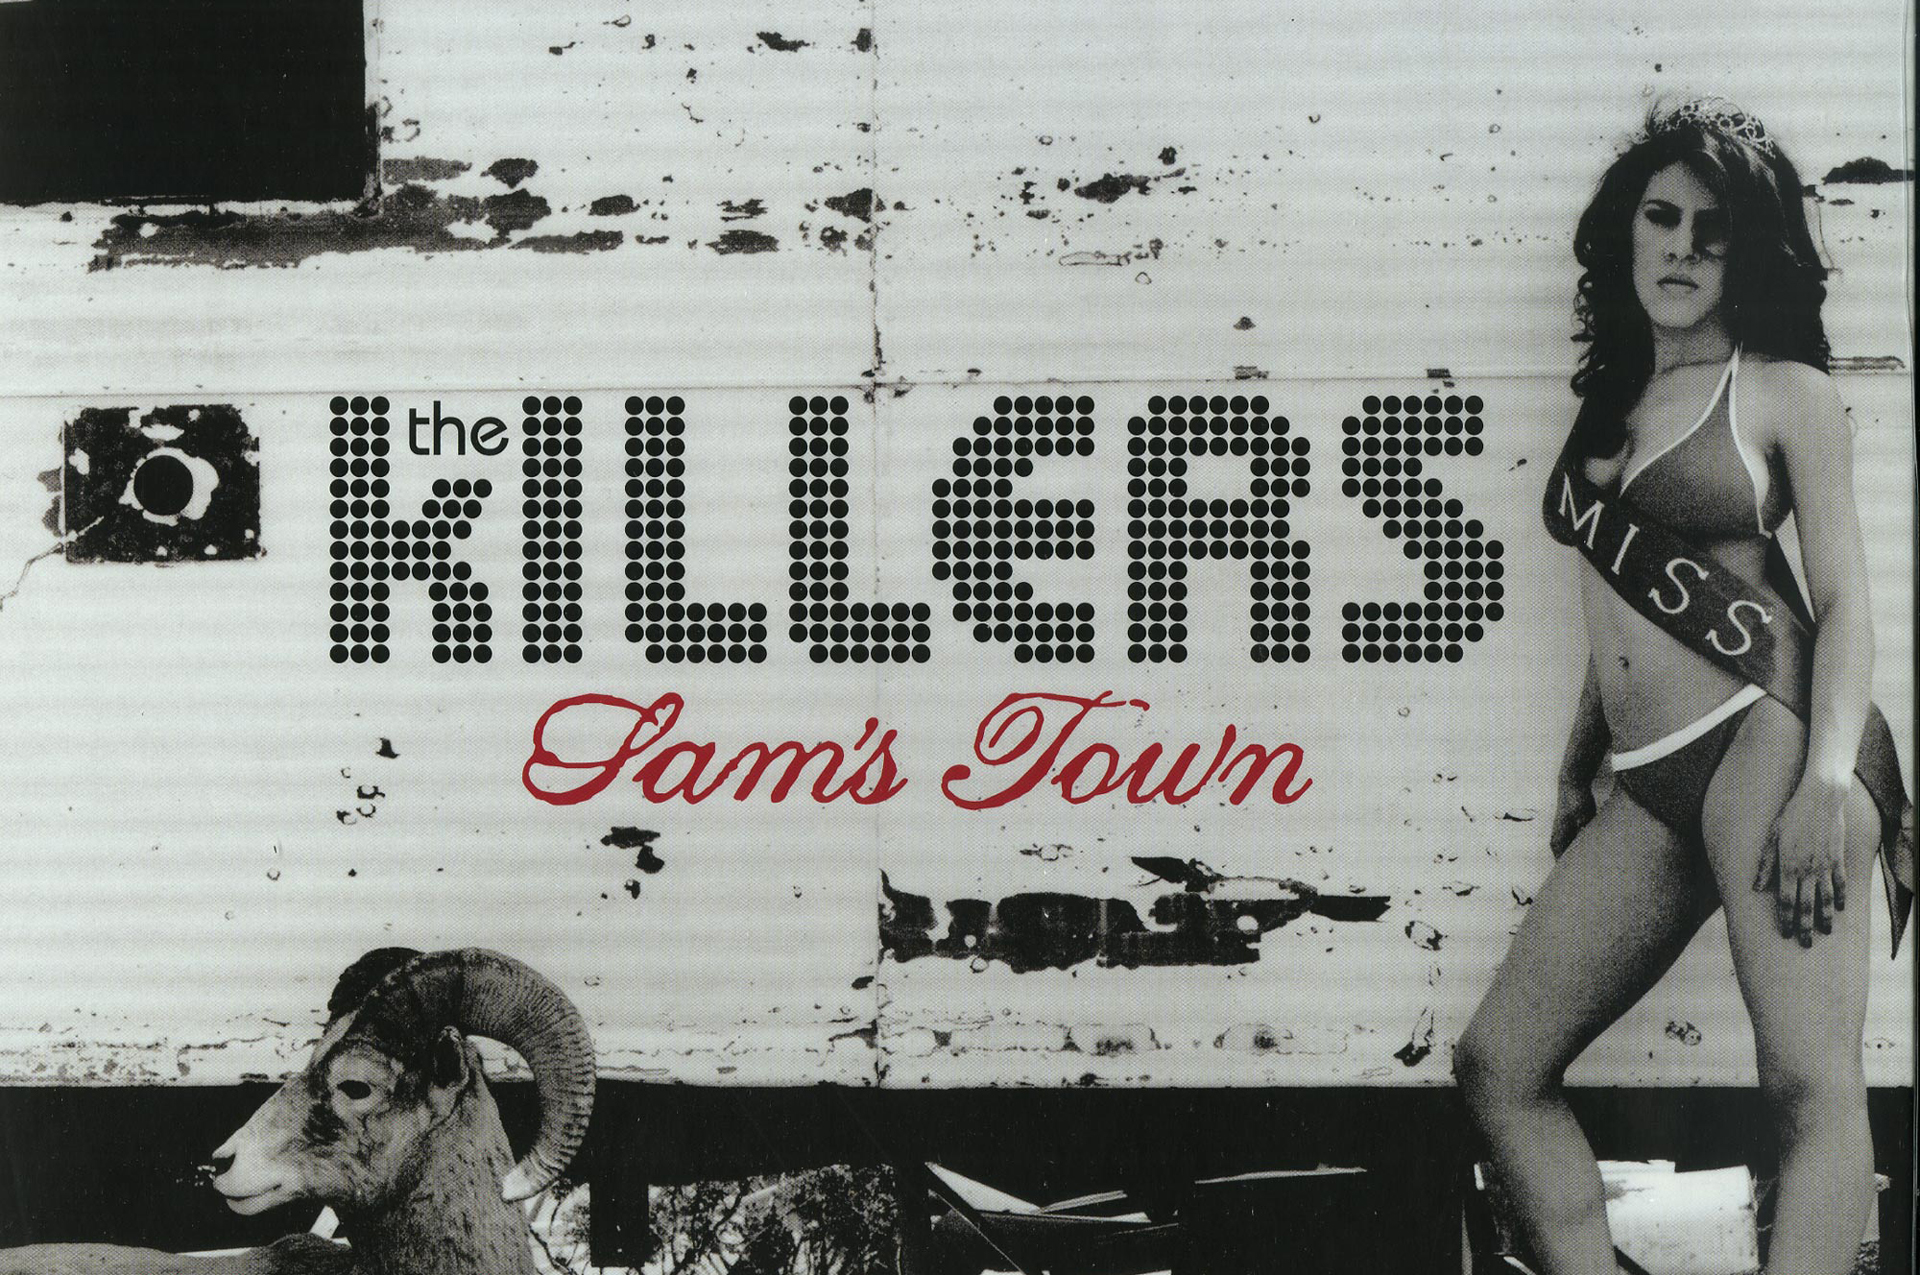 Killers обложка. Killers "Sam's Town". The Killers обложки альбомов. Sam's Town обложка. The Killers - when you were young.